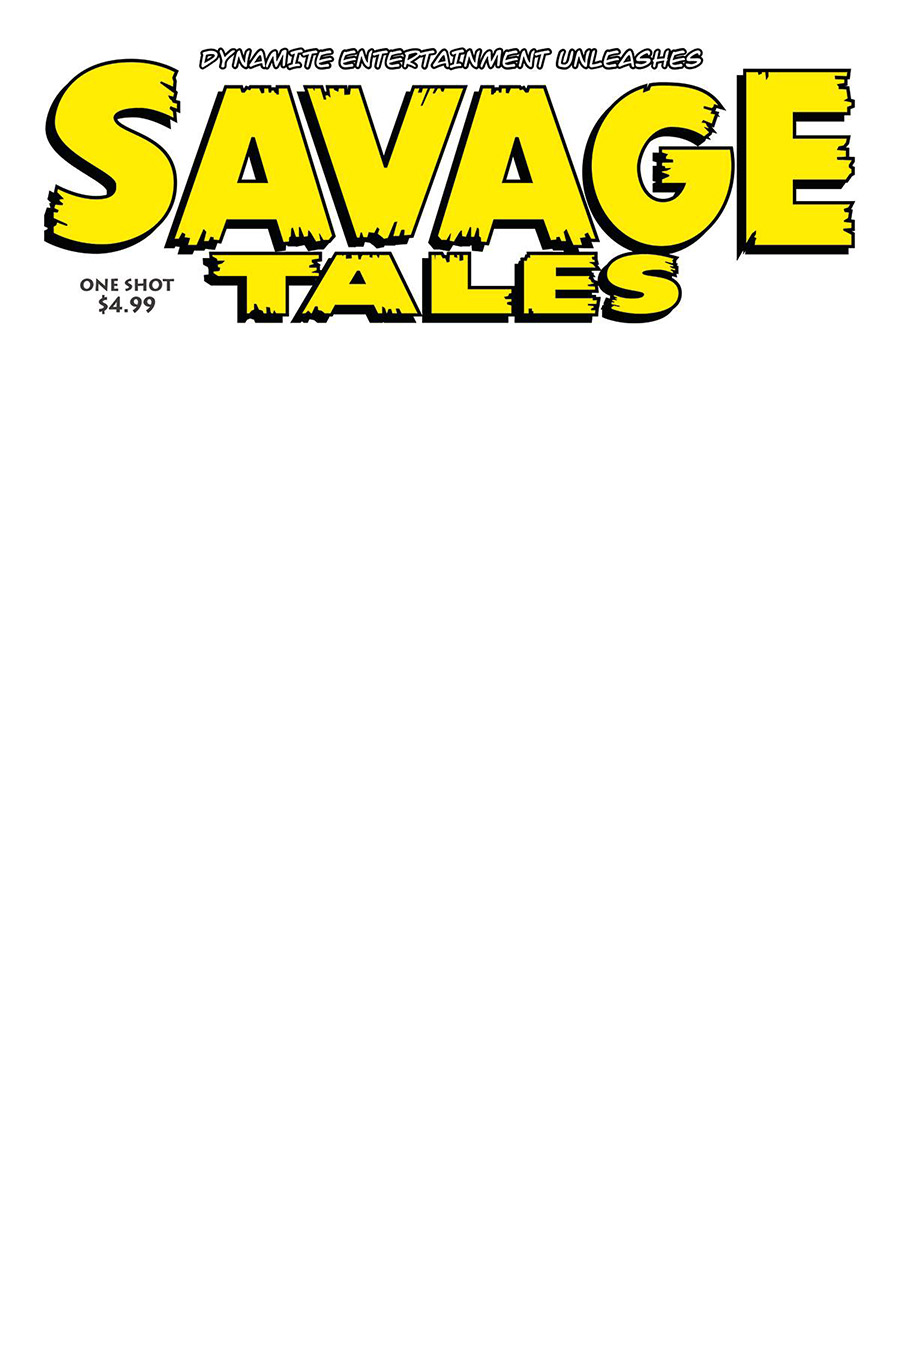 Savage Tales (DE) #1 (One Shot) Cover D Variant Blank Authentix Cover